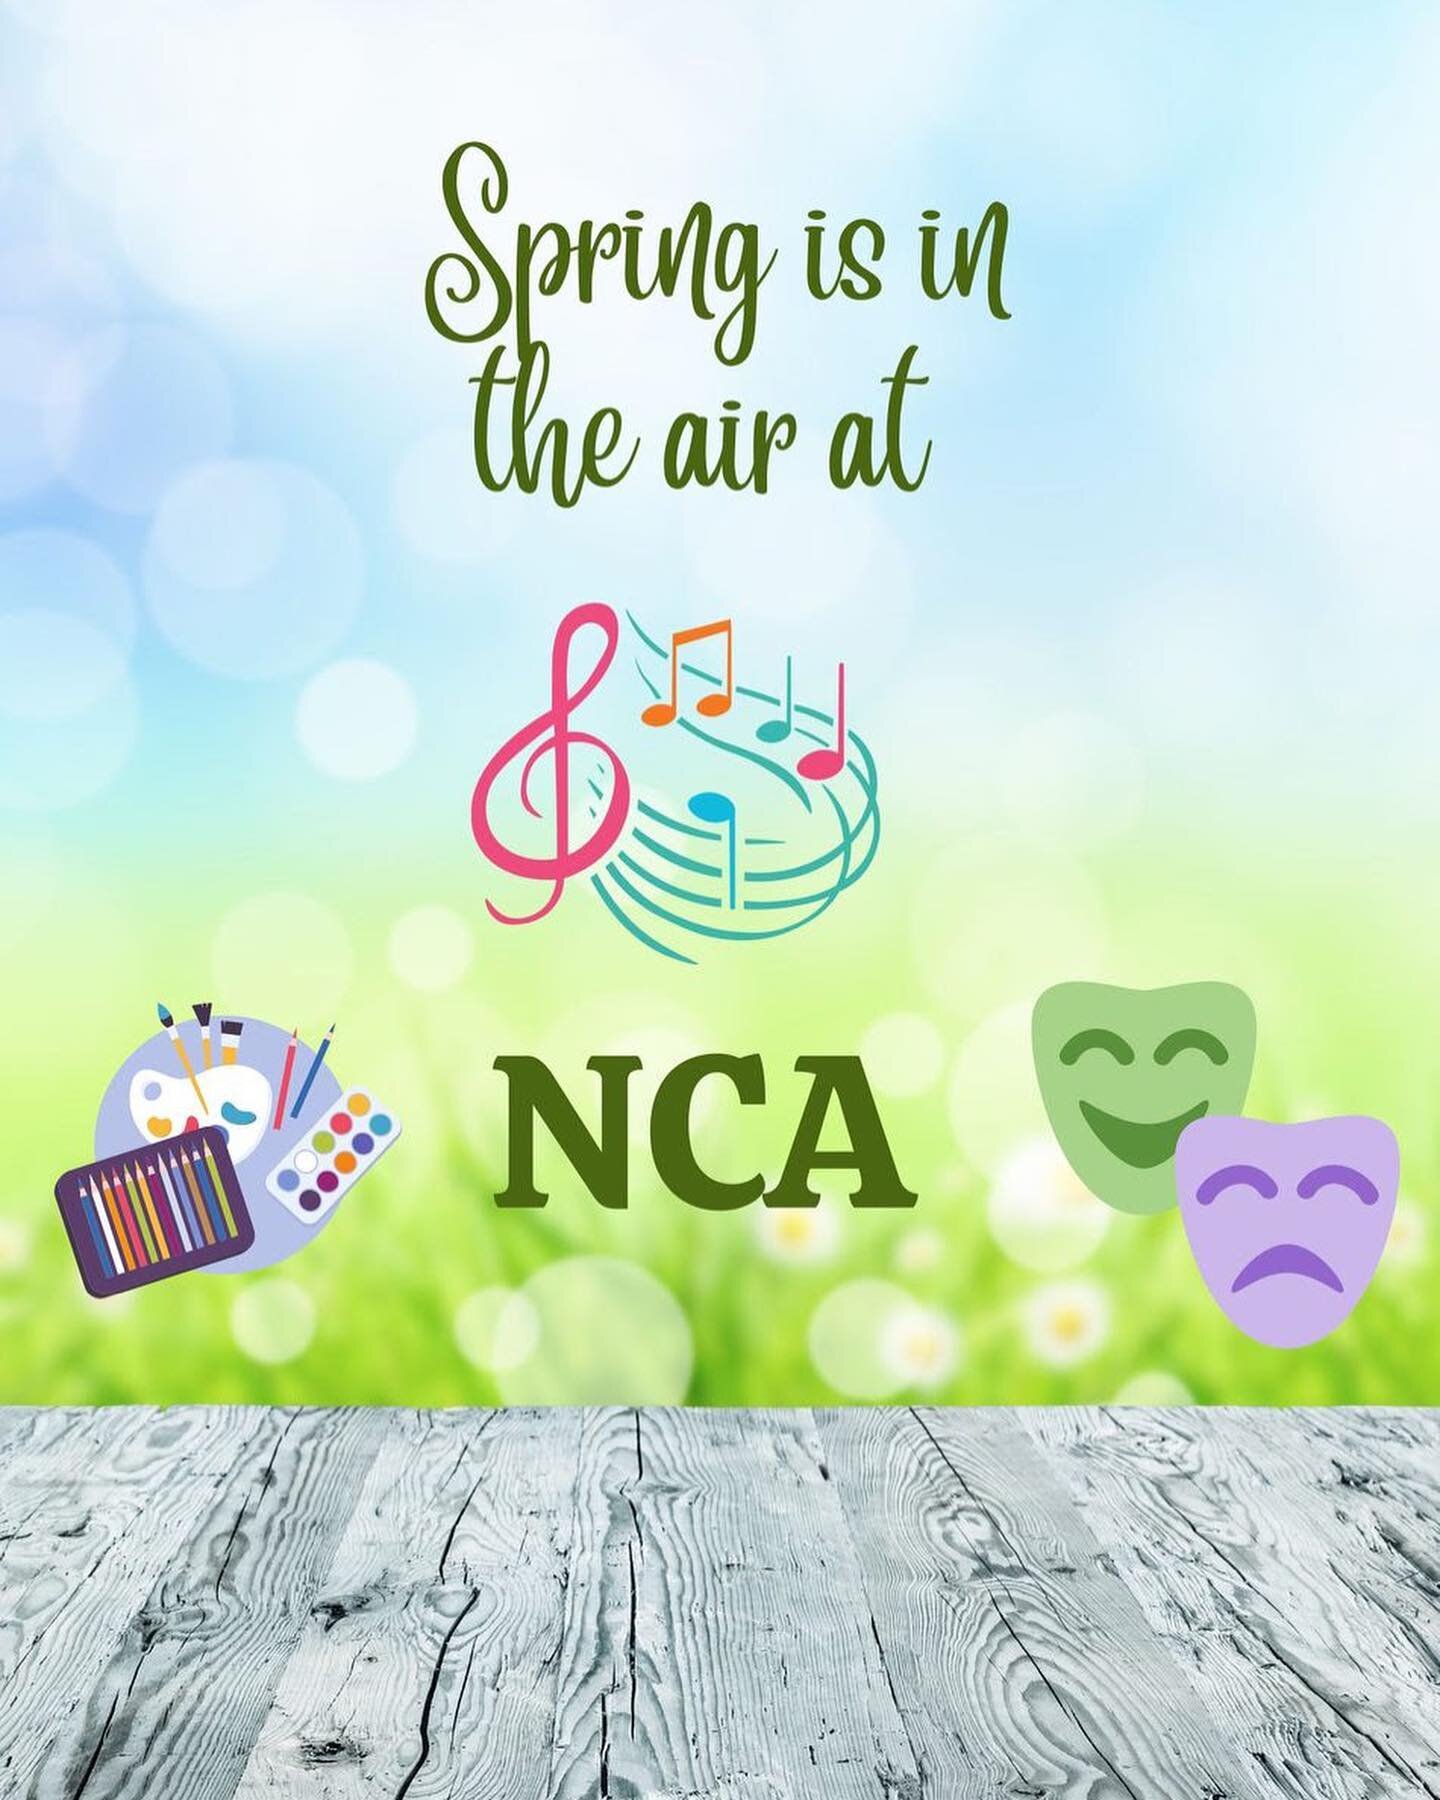 🎵🌸 Spring is the perfect time to let your creativity bloom! 🎨🌷 Whether it's playing a new melody or painting a colorful picture, art and music are great ways to express yourself and brighten up your day.  And speaking of painting, we have some ex